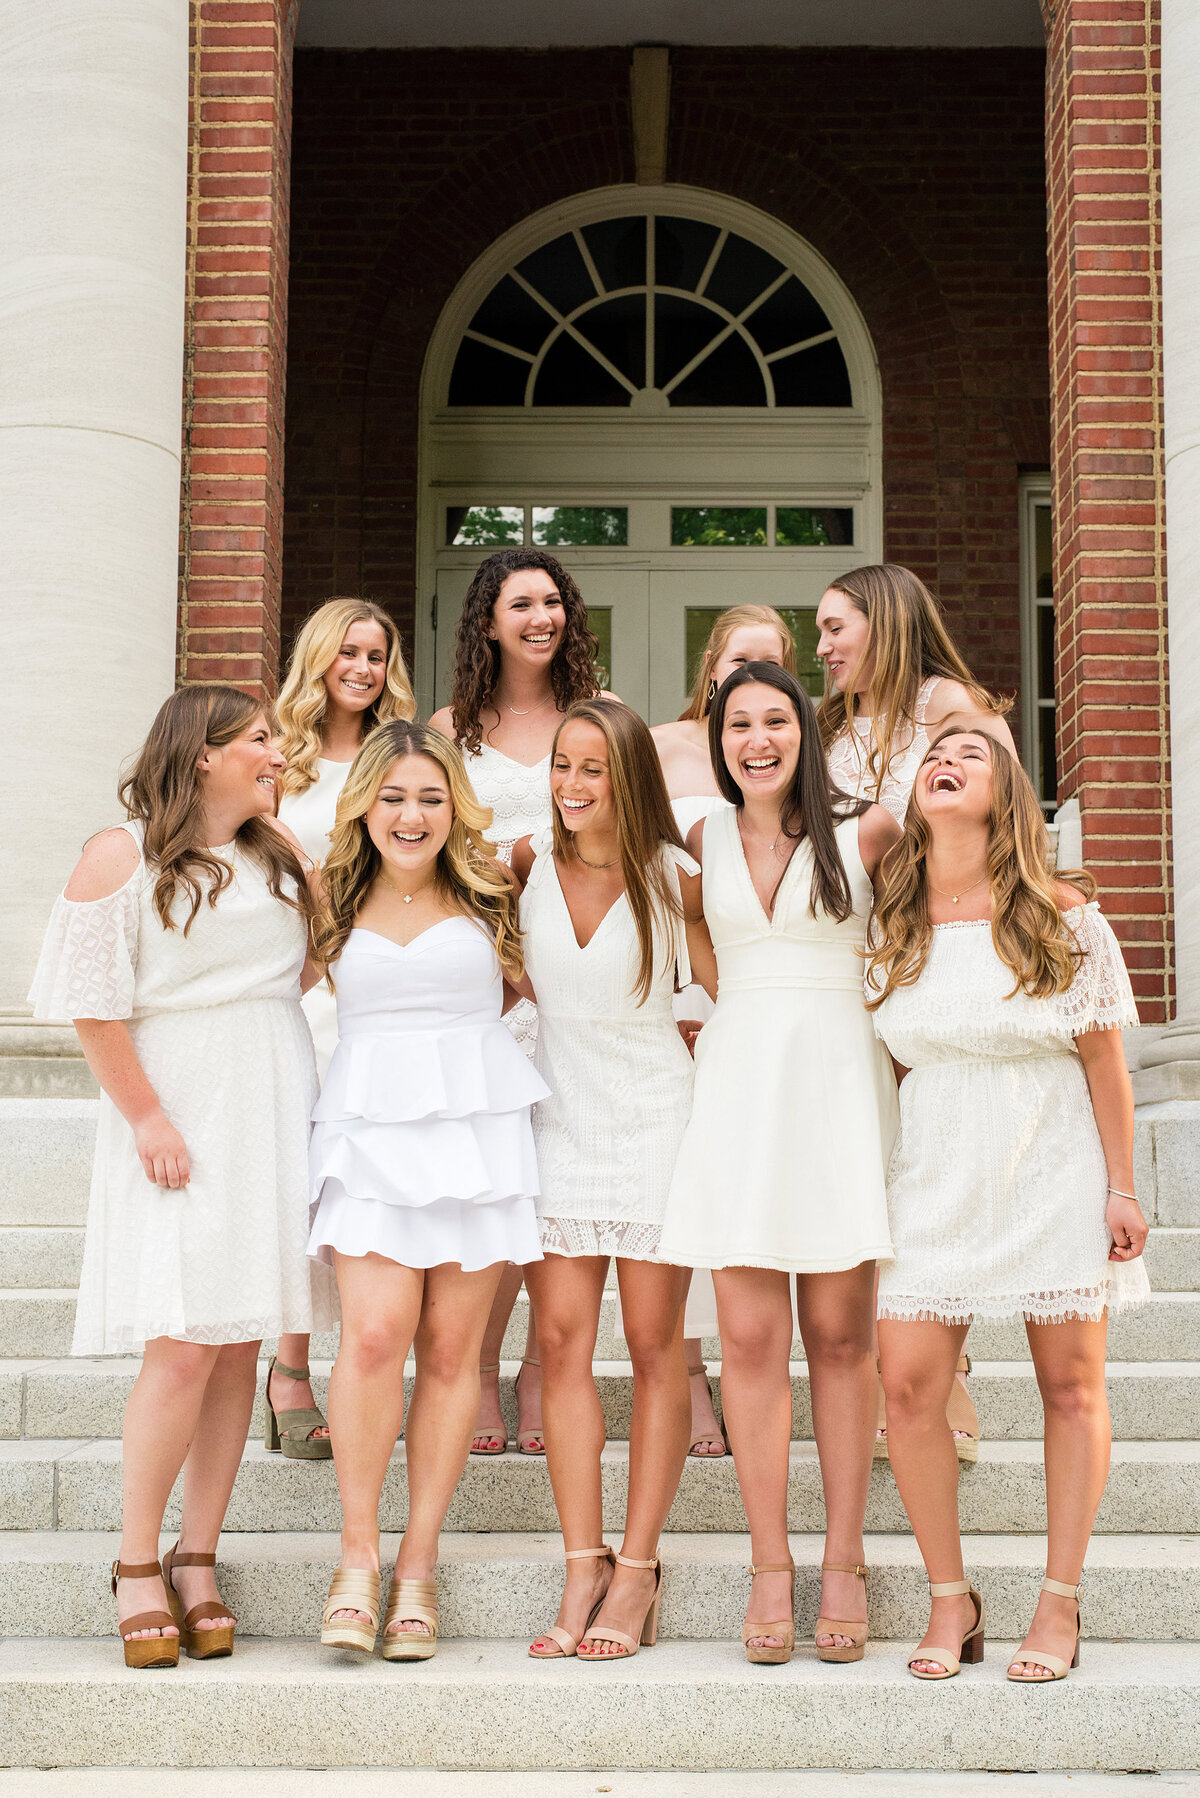 10 Senior girls on the steps at Vanderbilt University all wearing white dresses and laughing together